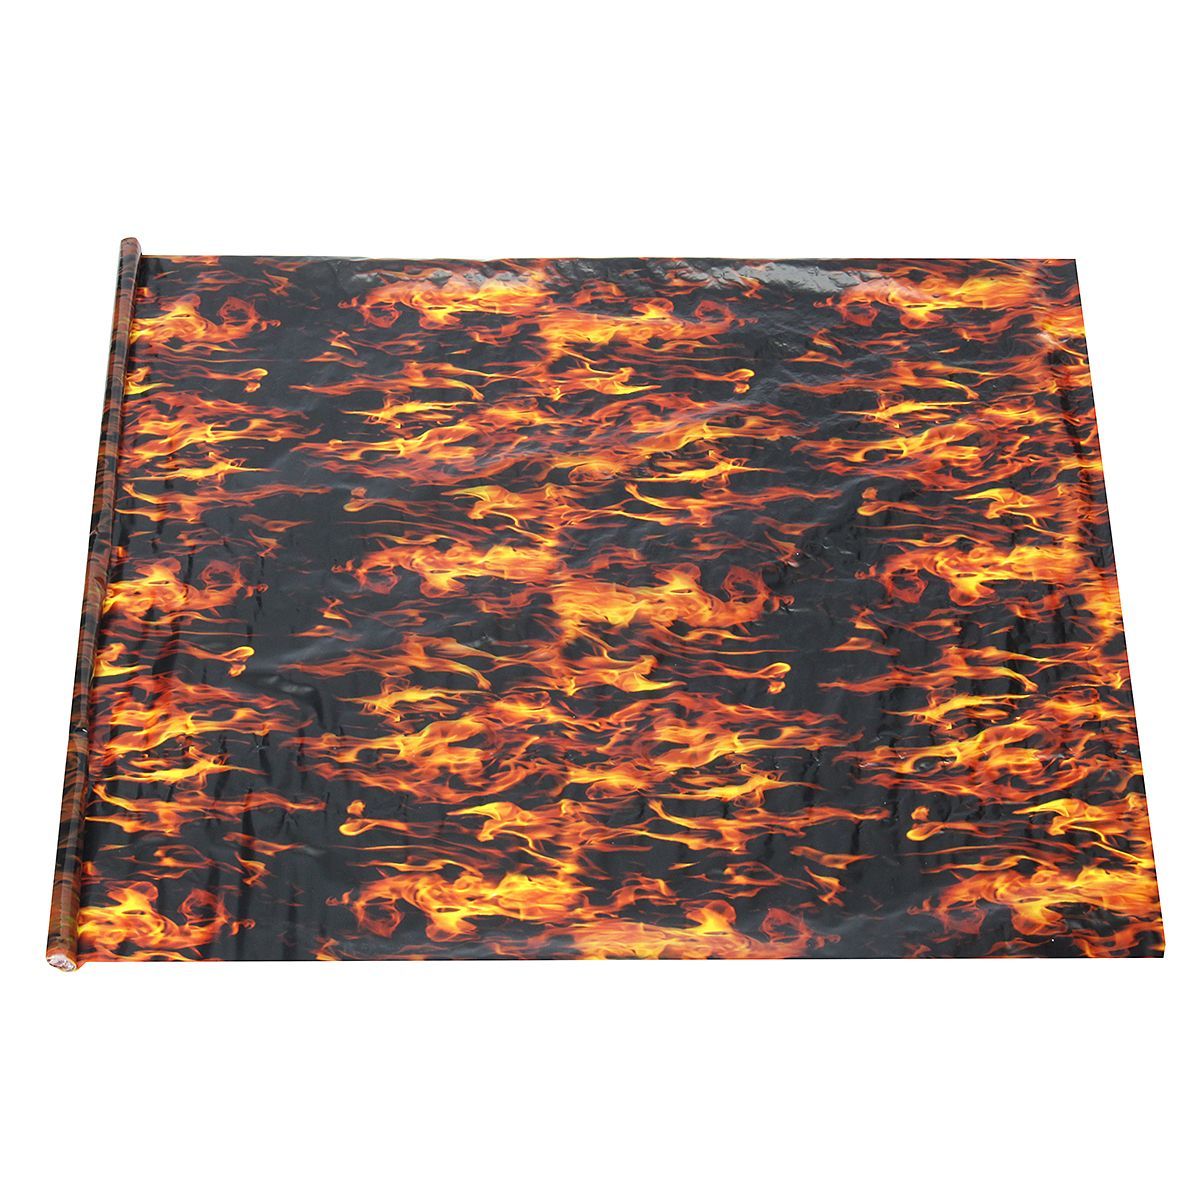 PVA-Hydrographic-Black-Flame-Fire-Water-Transfer-Printing-Hydro-Dip-Film-Car-Decal-1370769